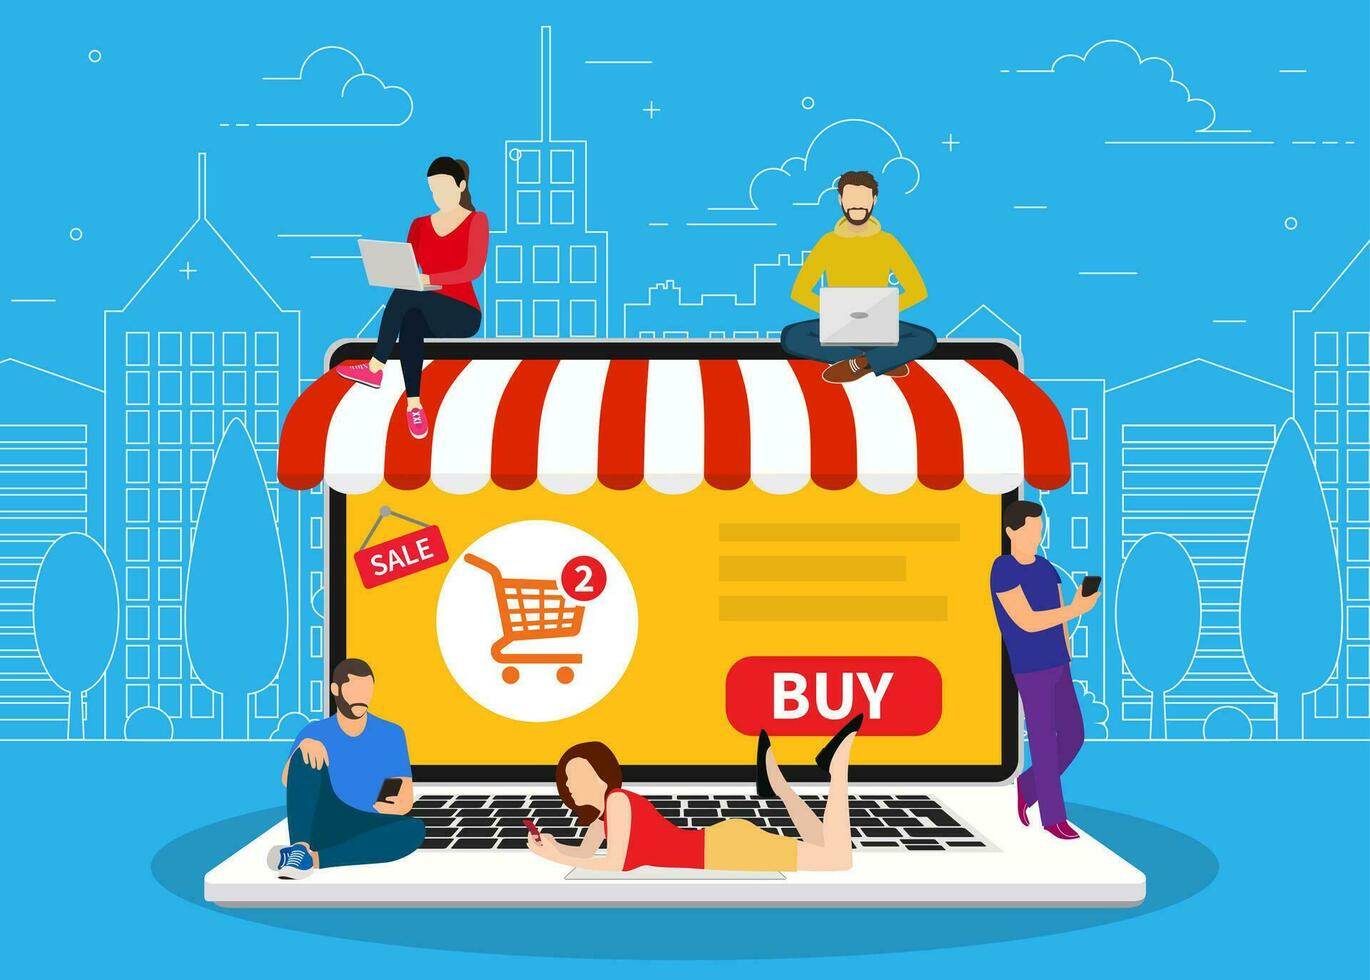 E-commerce cart concept. people using mobile gadgets such as tablet and smartphone for online purchasing and ordering goods. Vector illustration in flat style